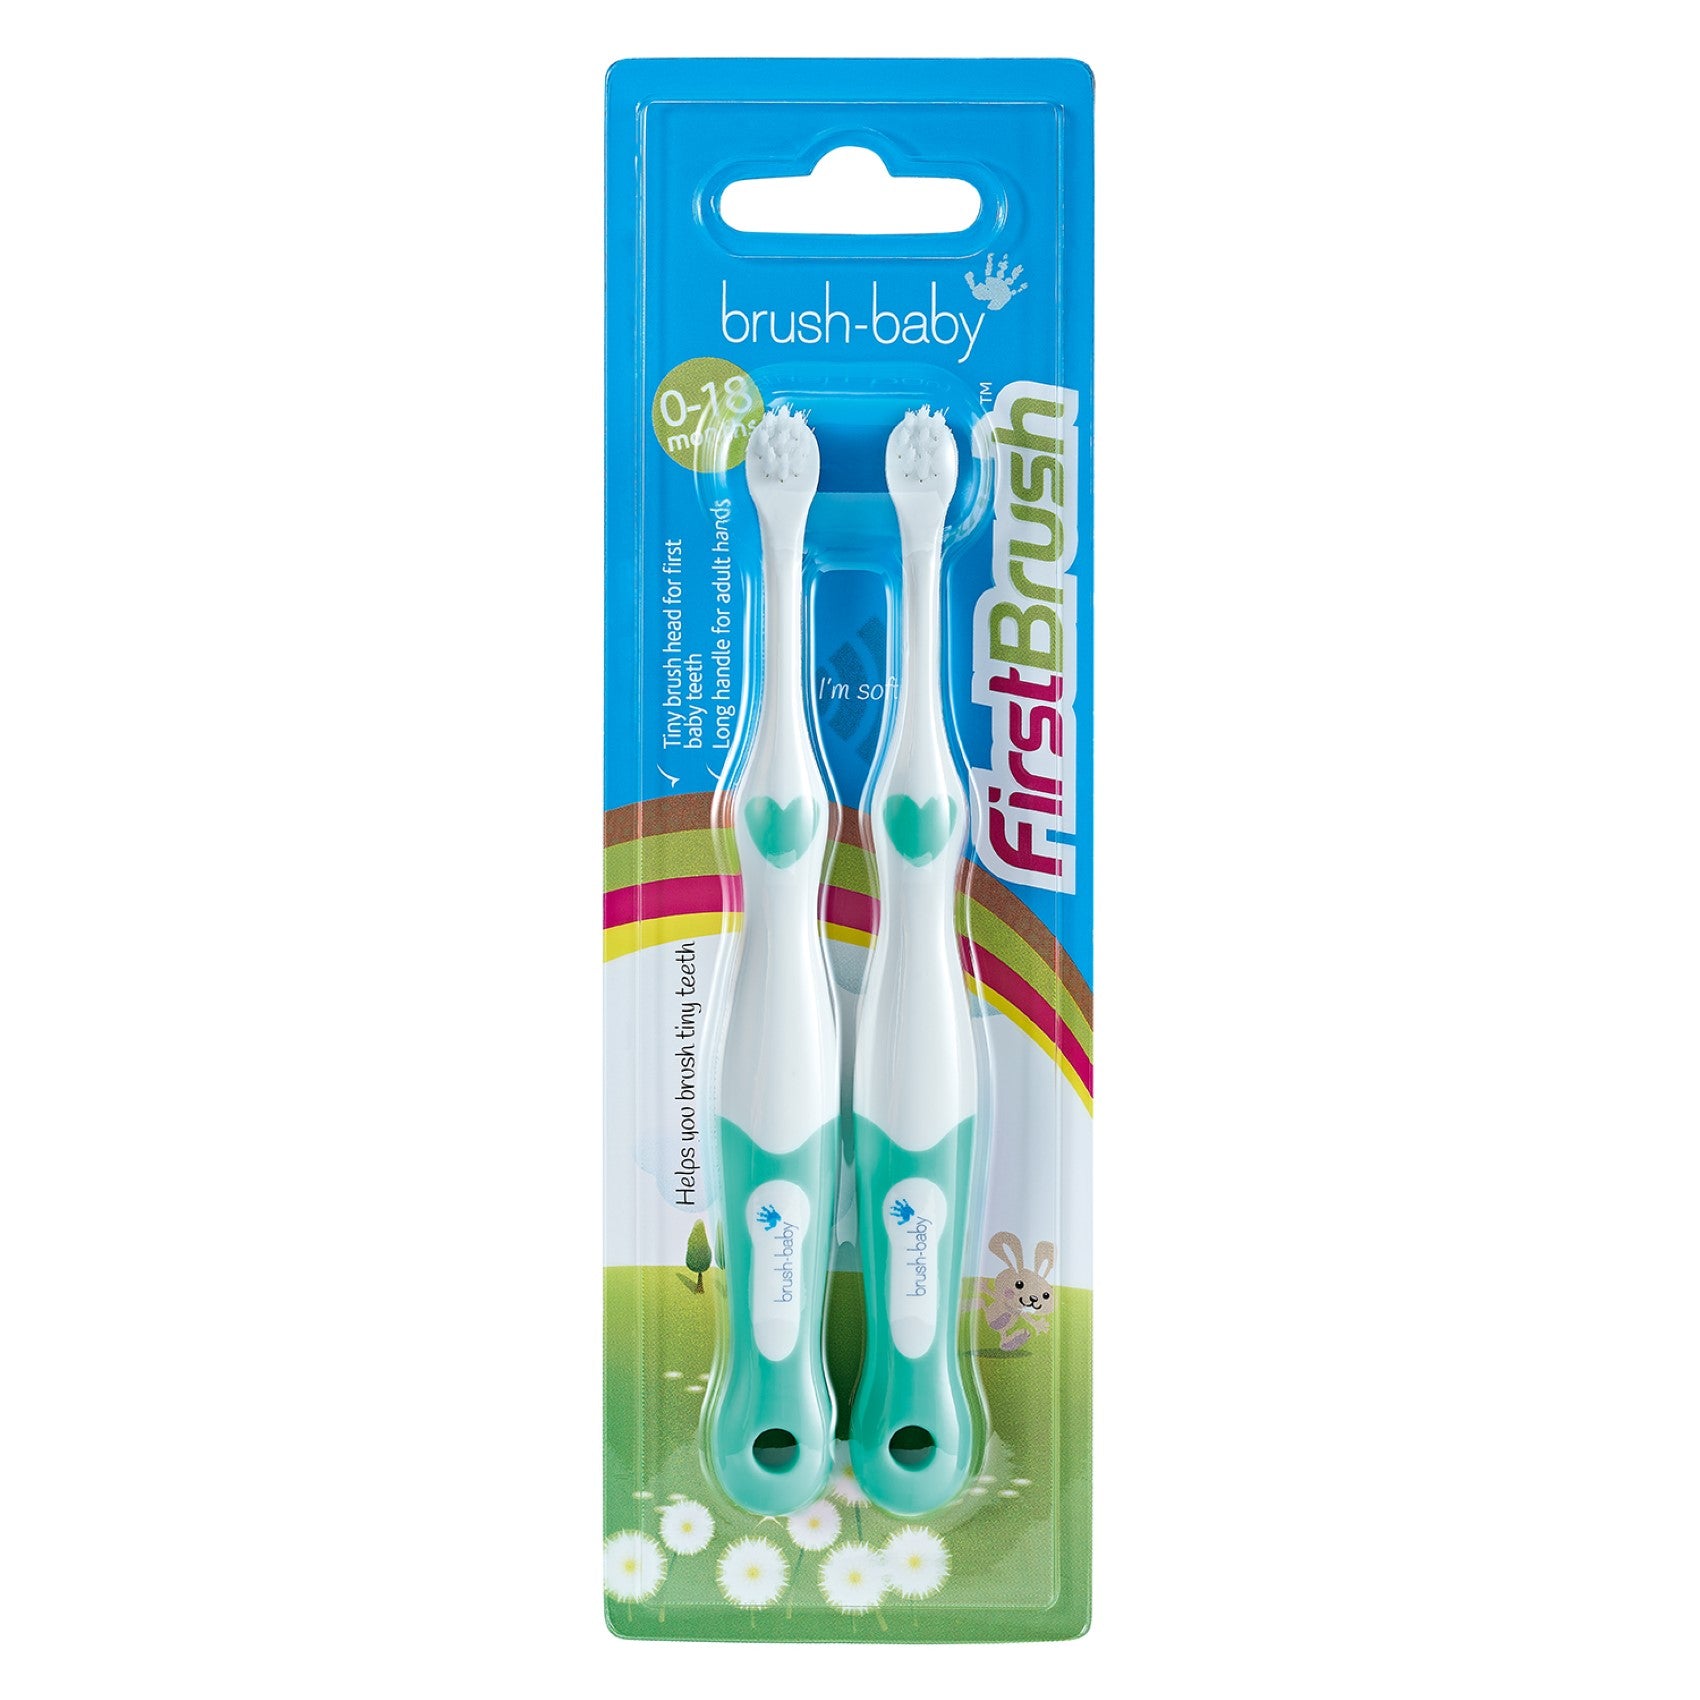 Brush-Baby First Brush (Mixed Colours, Pack of 2)